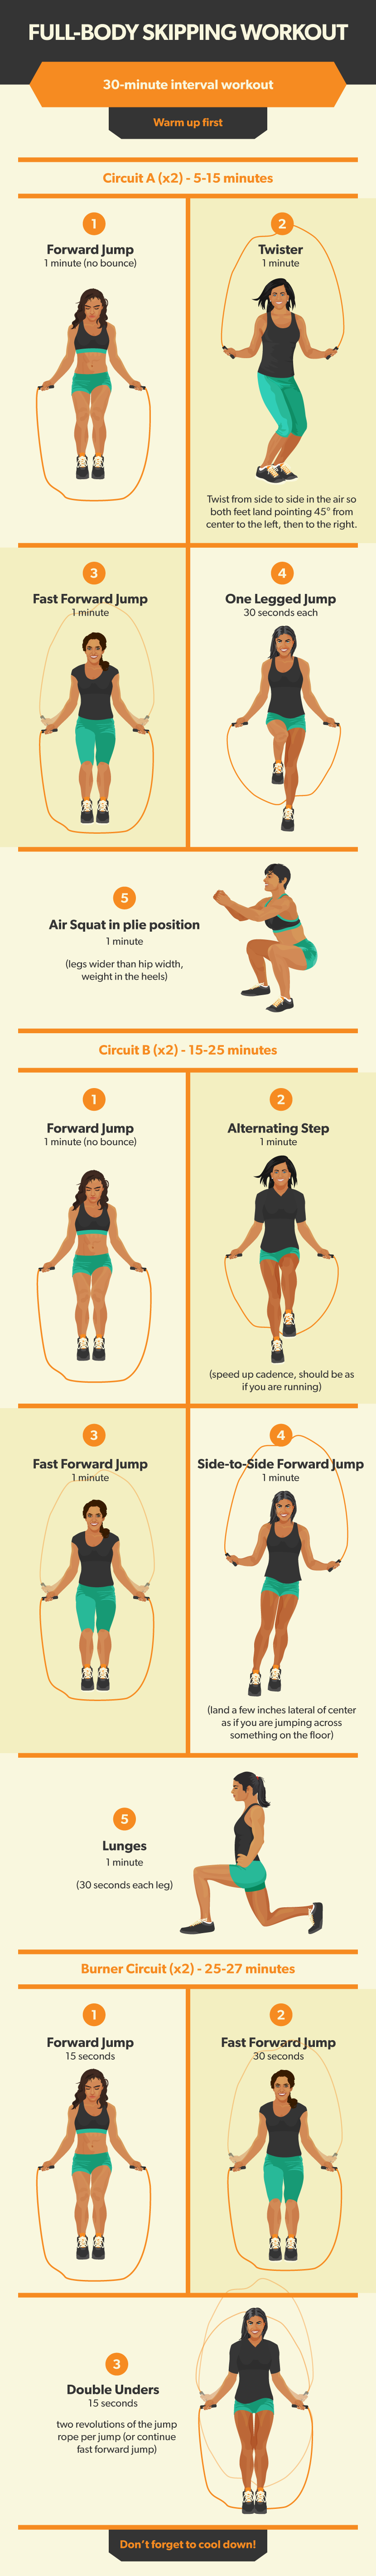 how to use a jump rope